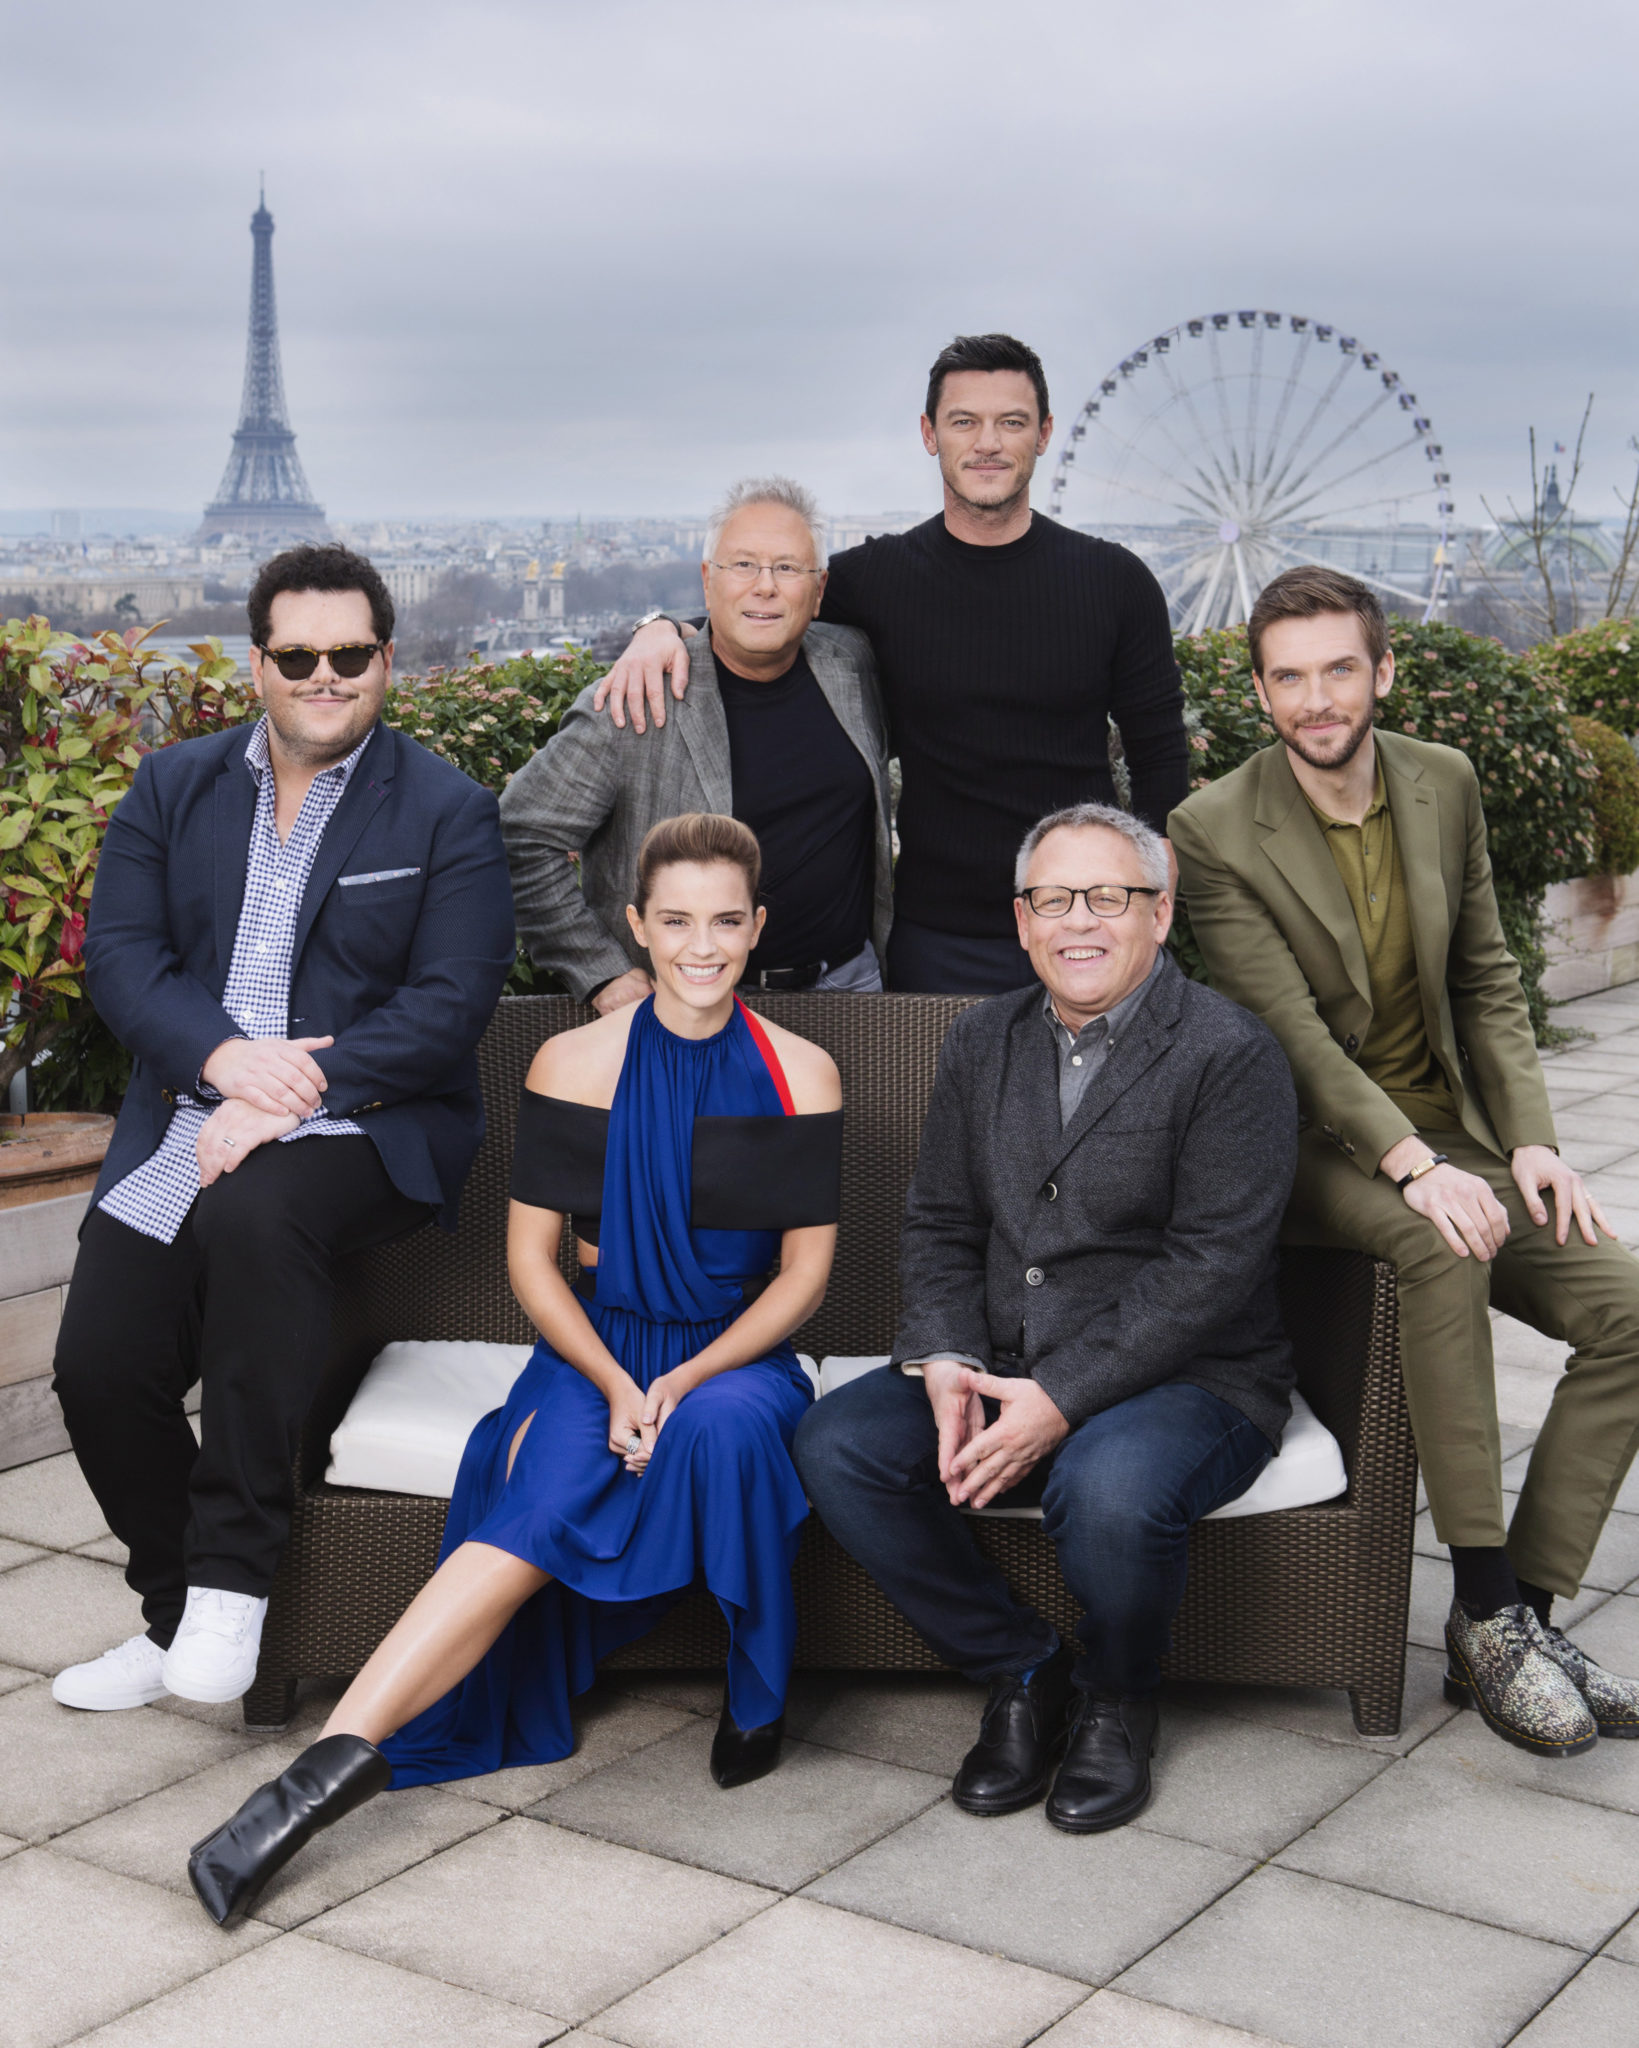 The Cast of “Beauty and the Beast” Kicks Off Their Worldwide Tour in Paris